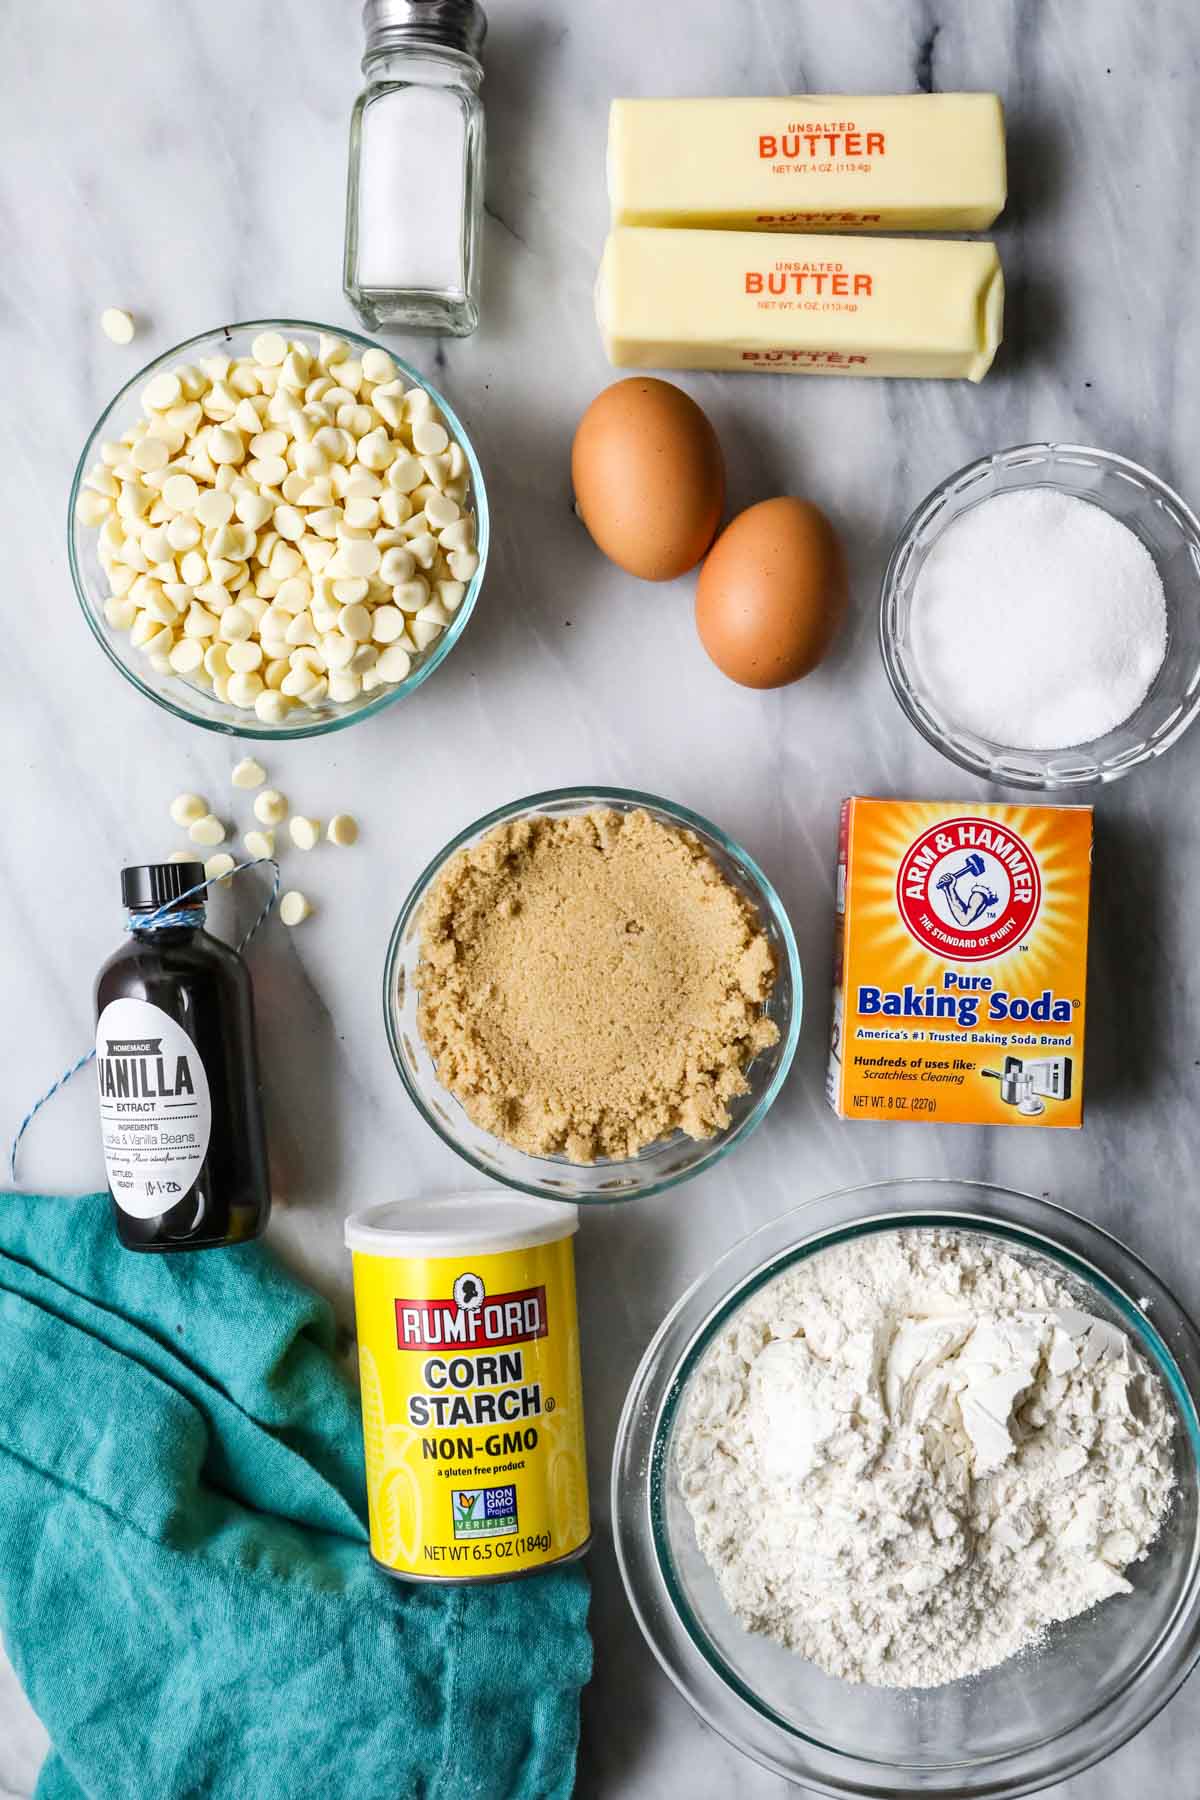 Overhead view of ingredients including eggs, white chocolate chips, brown sugar, and more.